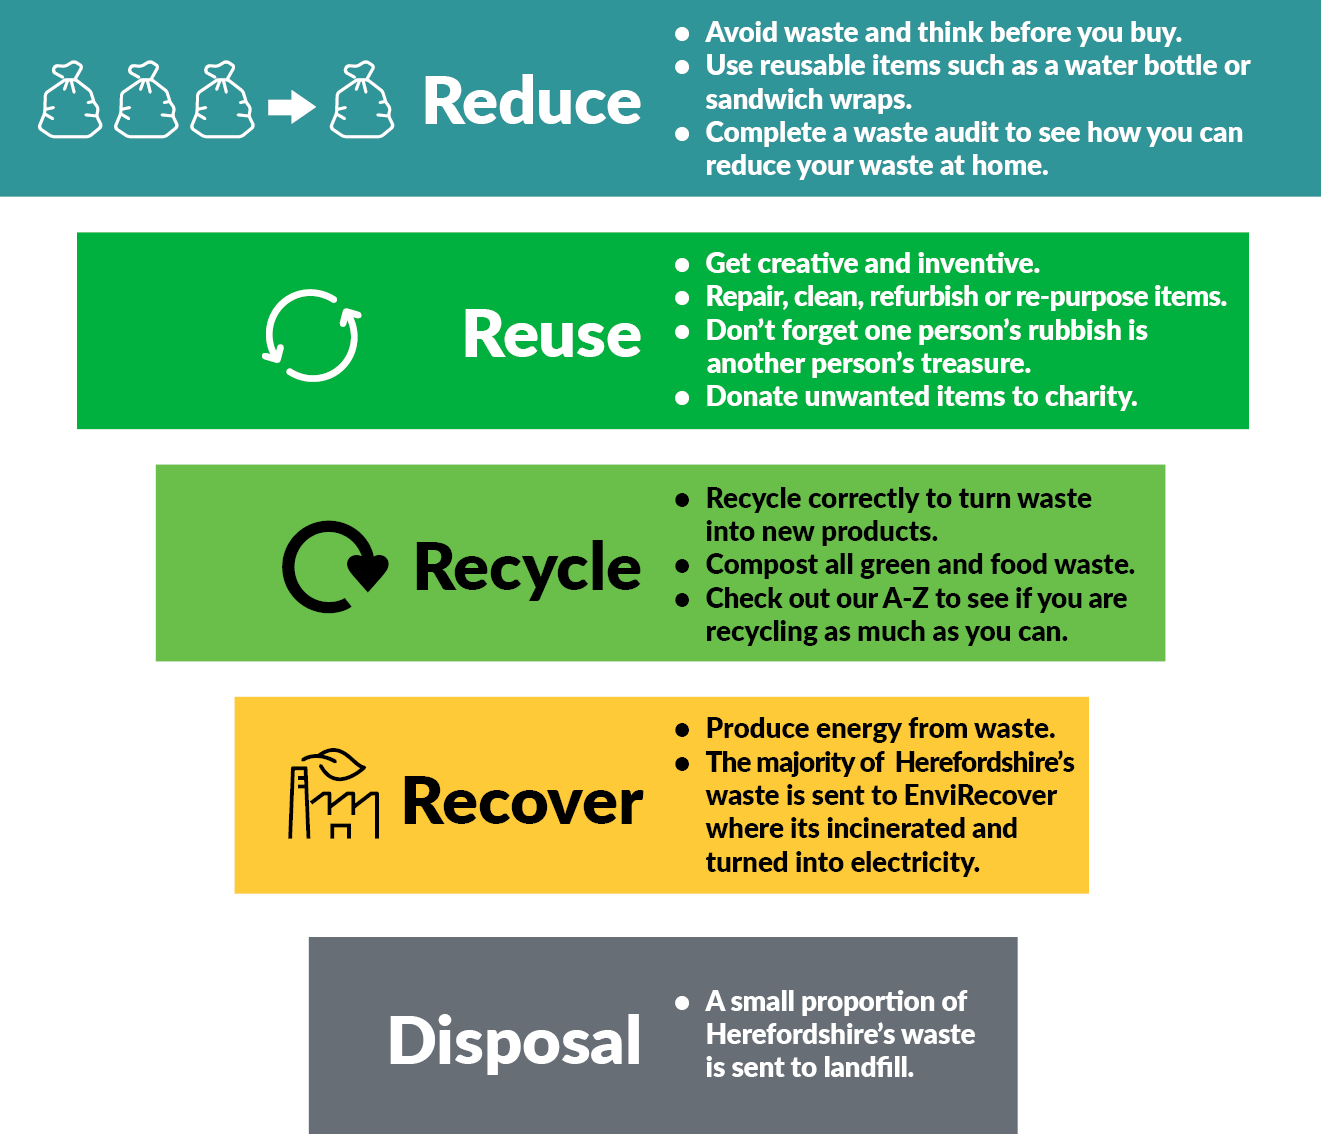 Illlustration of waste hierarchy - Reduce, reuse, recycle, recover, disposal - with reduce the first action to take